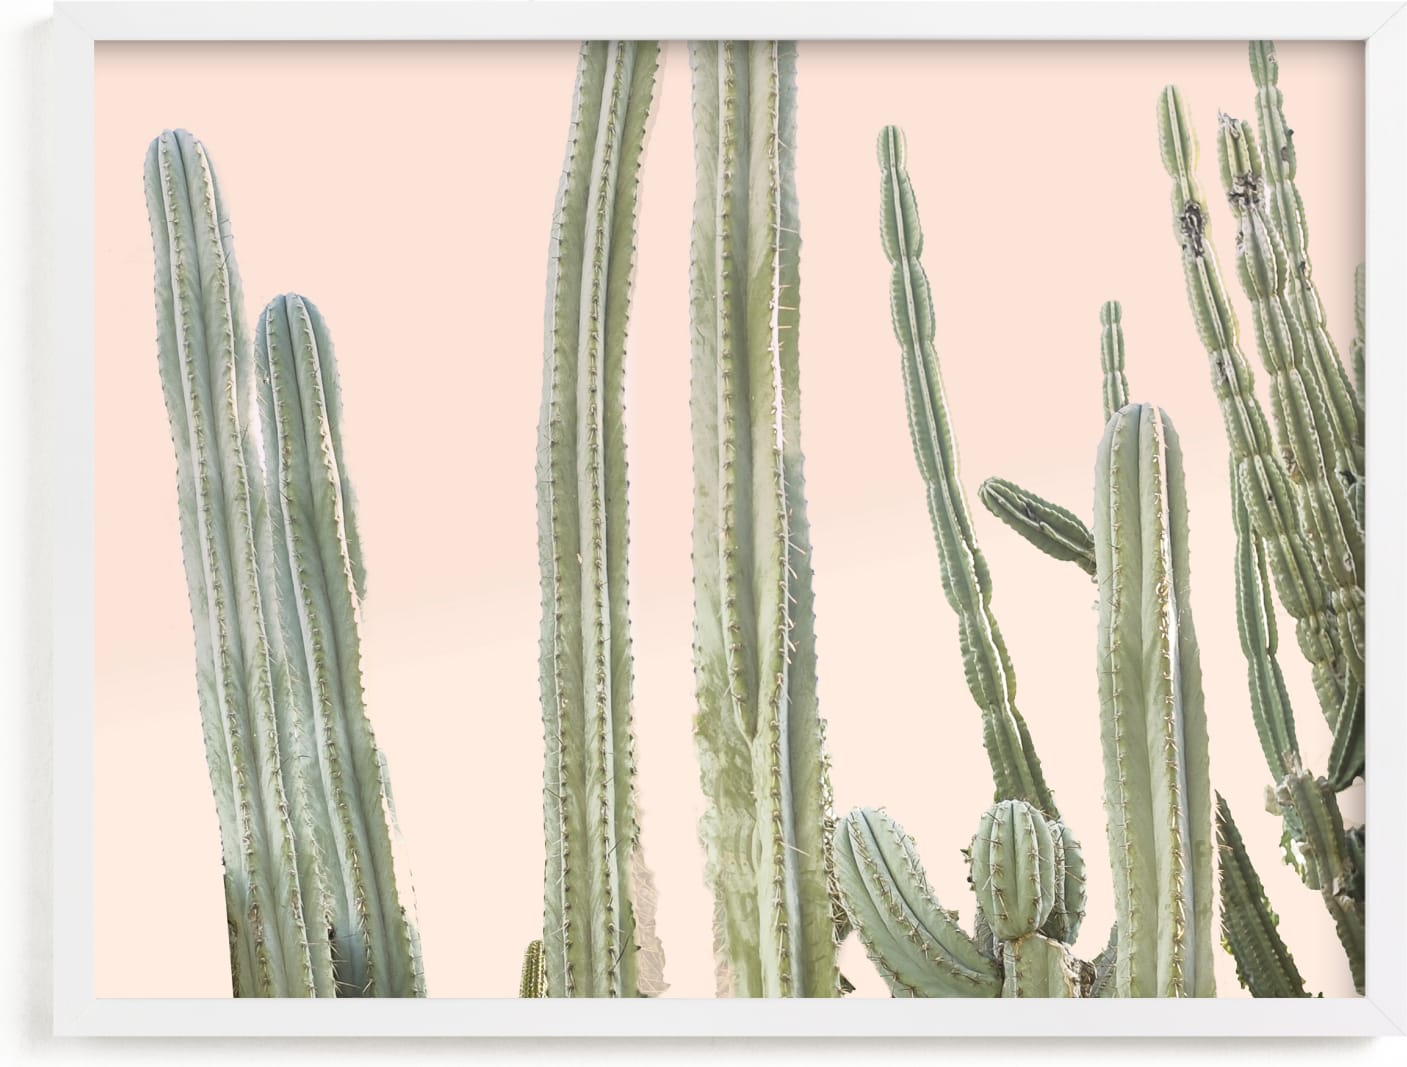 This is a pink art by Wilder California called Peachy Cactus Print.